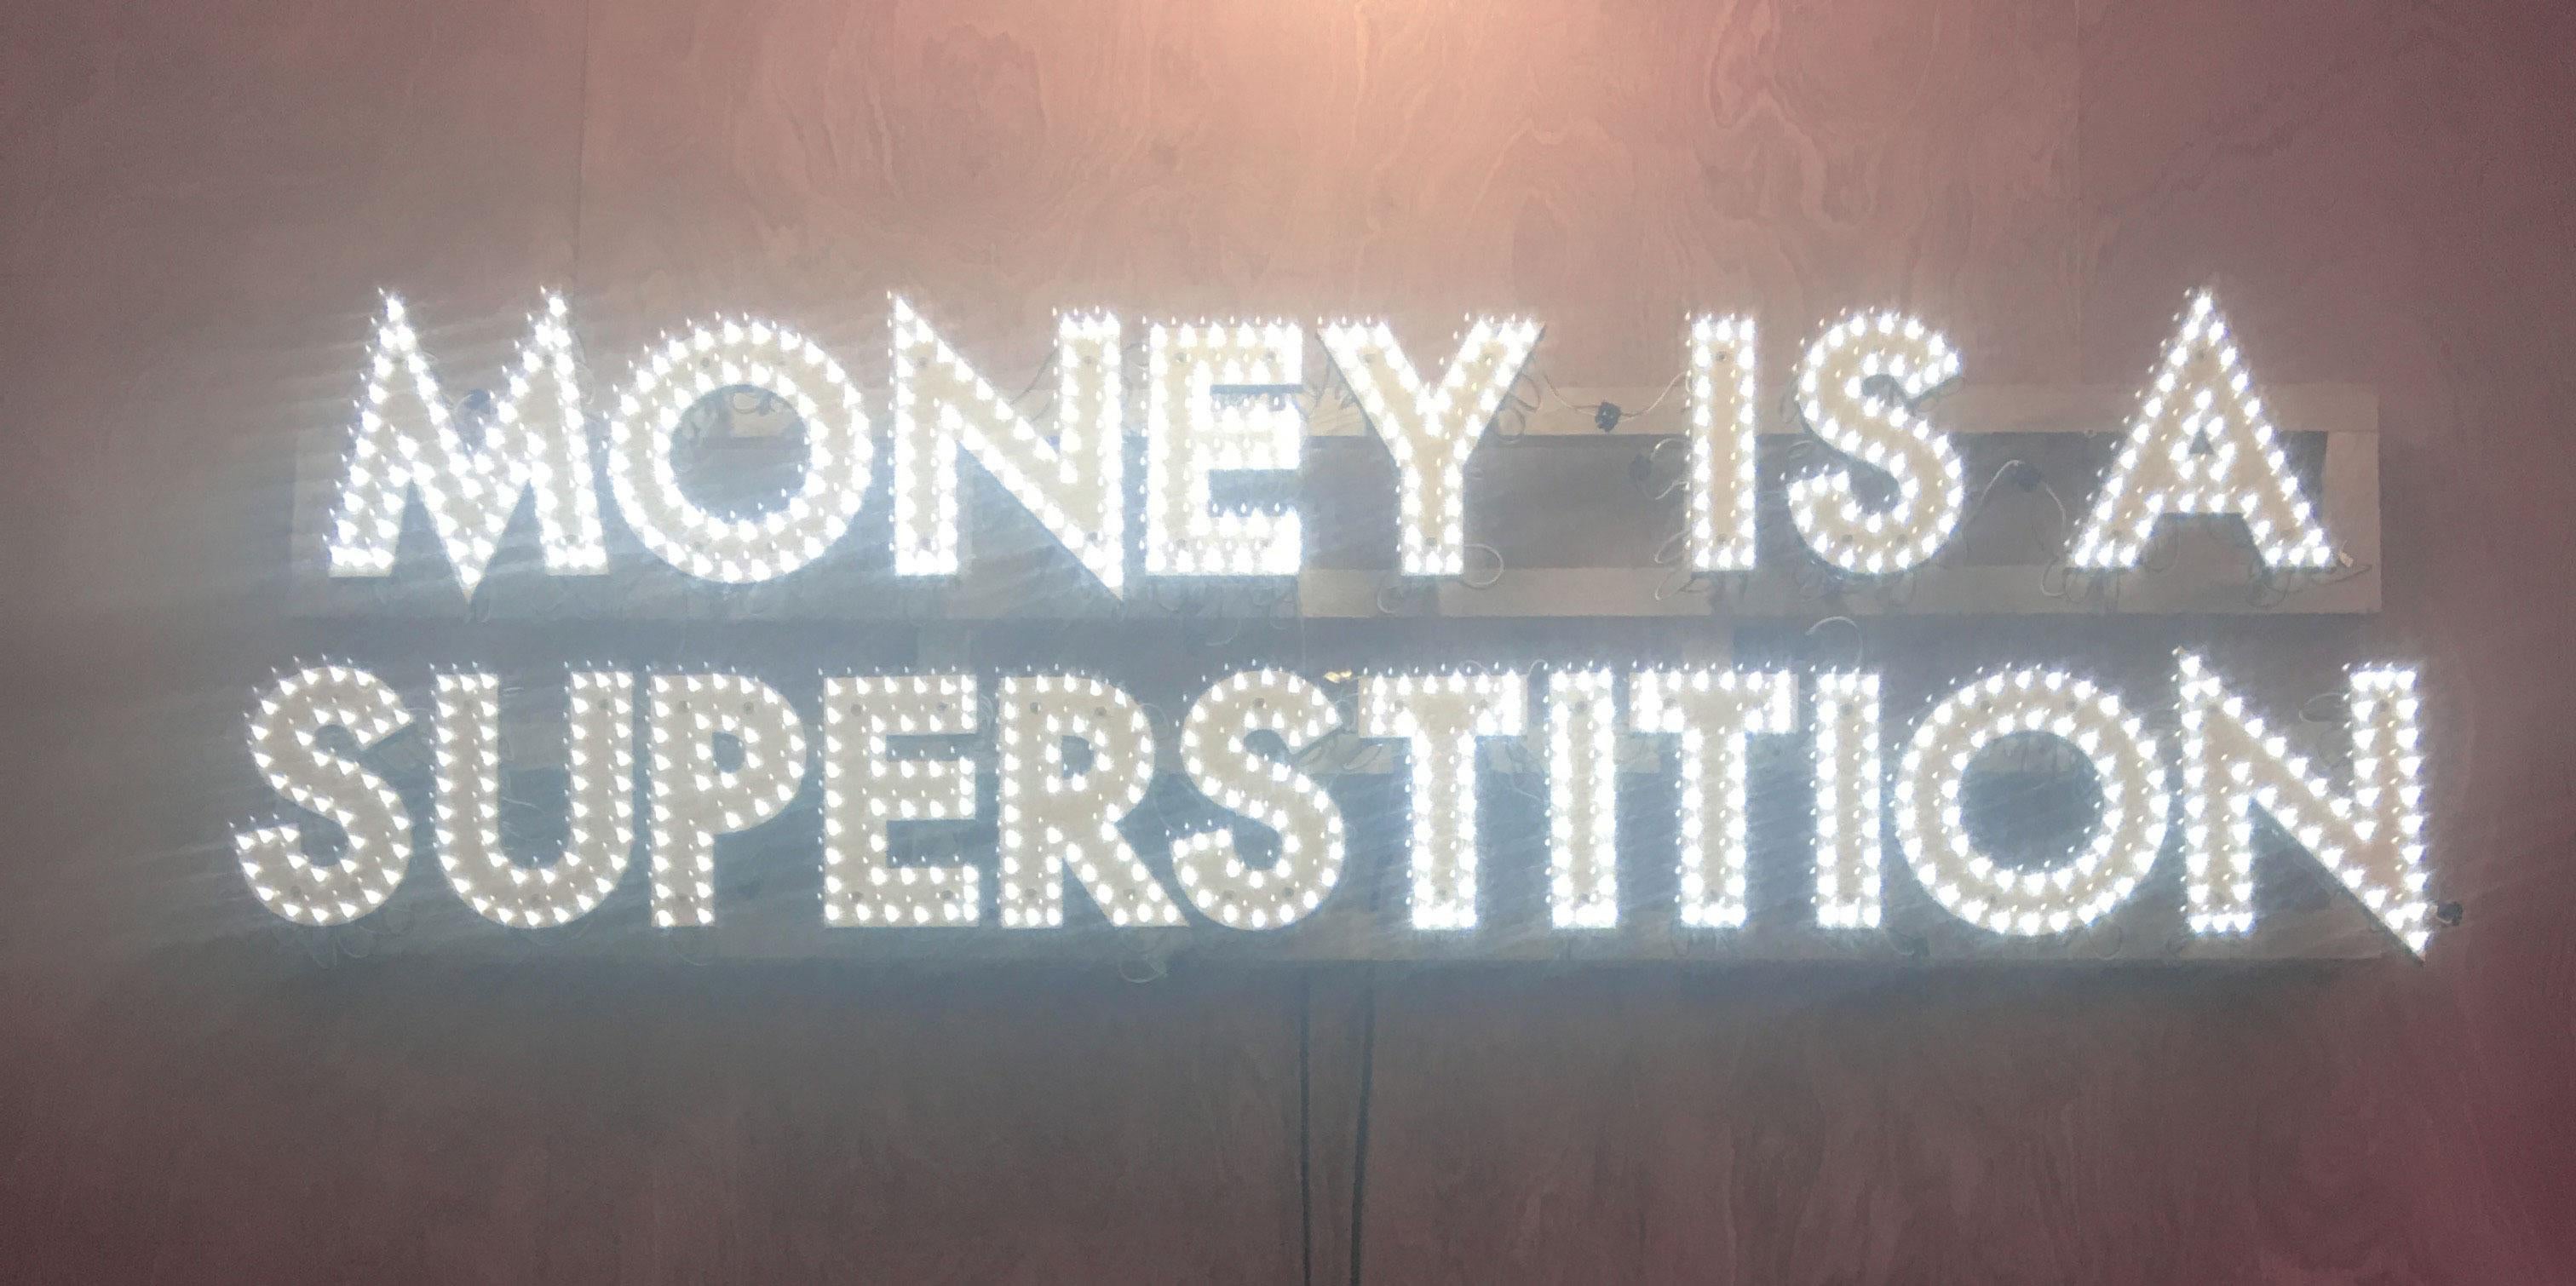 Robert Montgomery Abstract Sculpture - Money is a Superstition